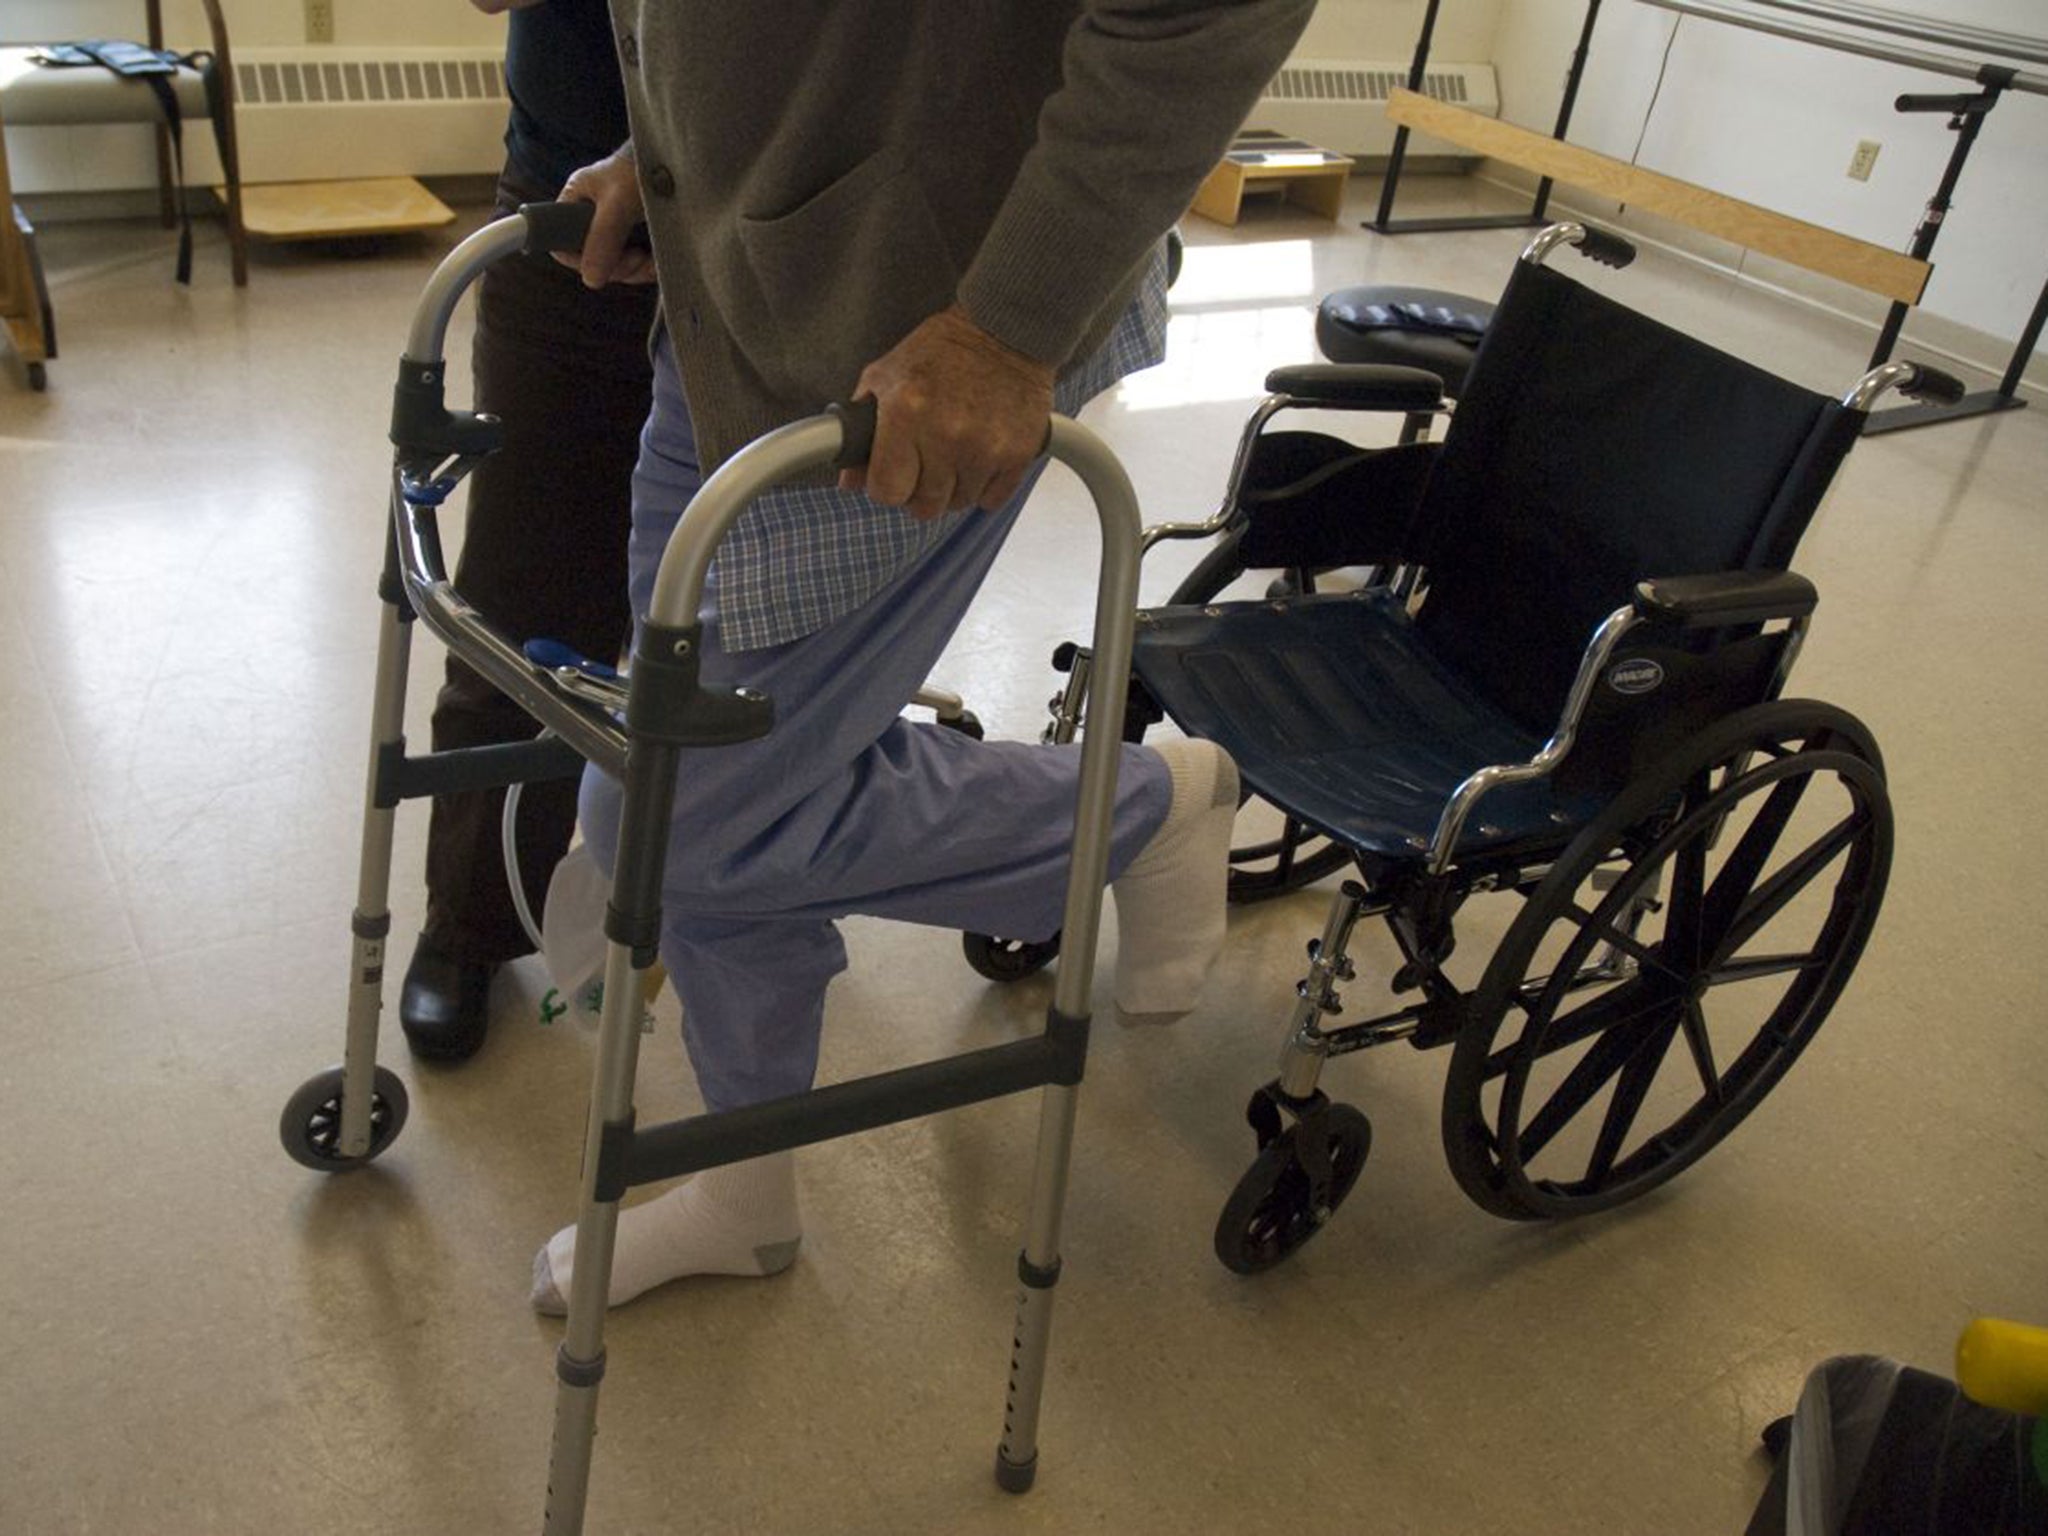 Demand for wheelchairs is growing as more people live for longer